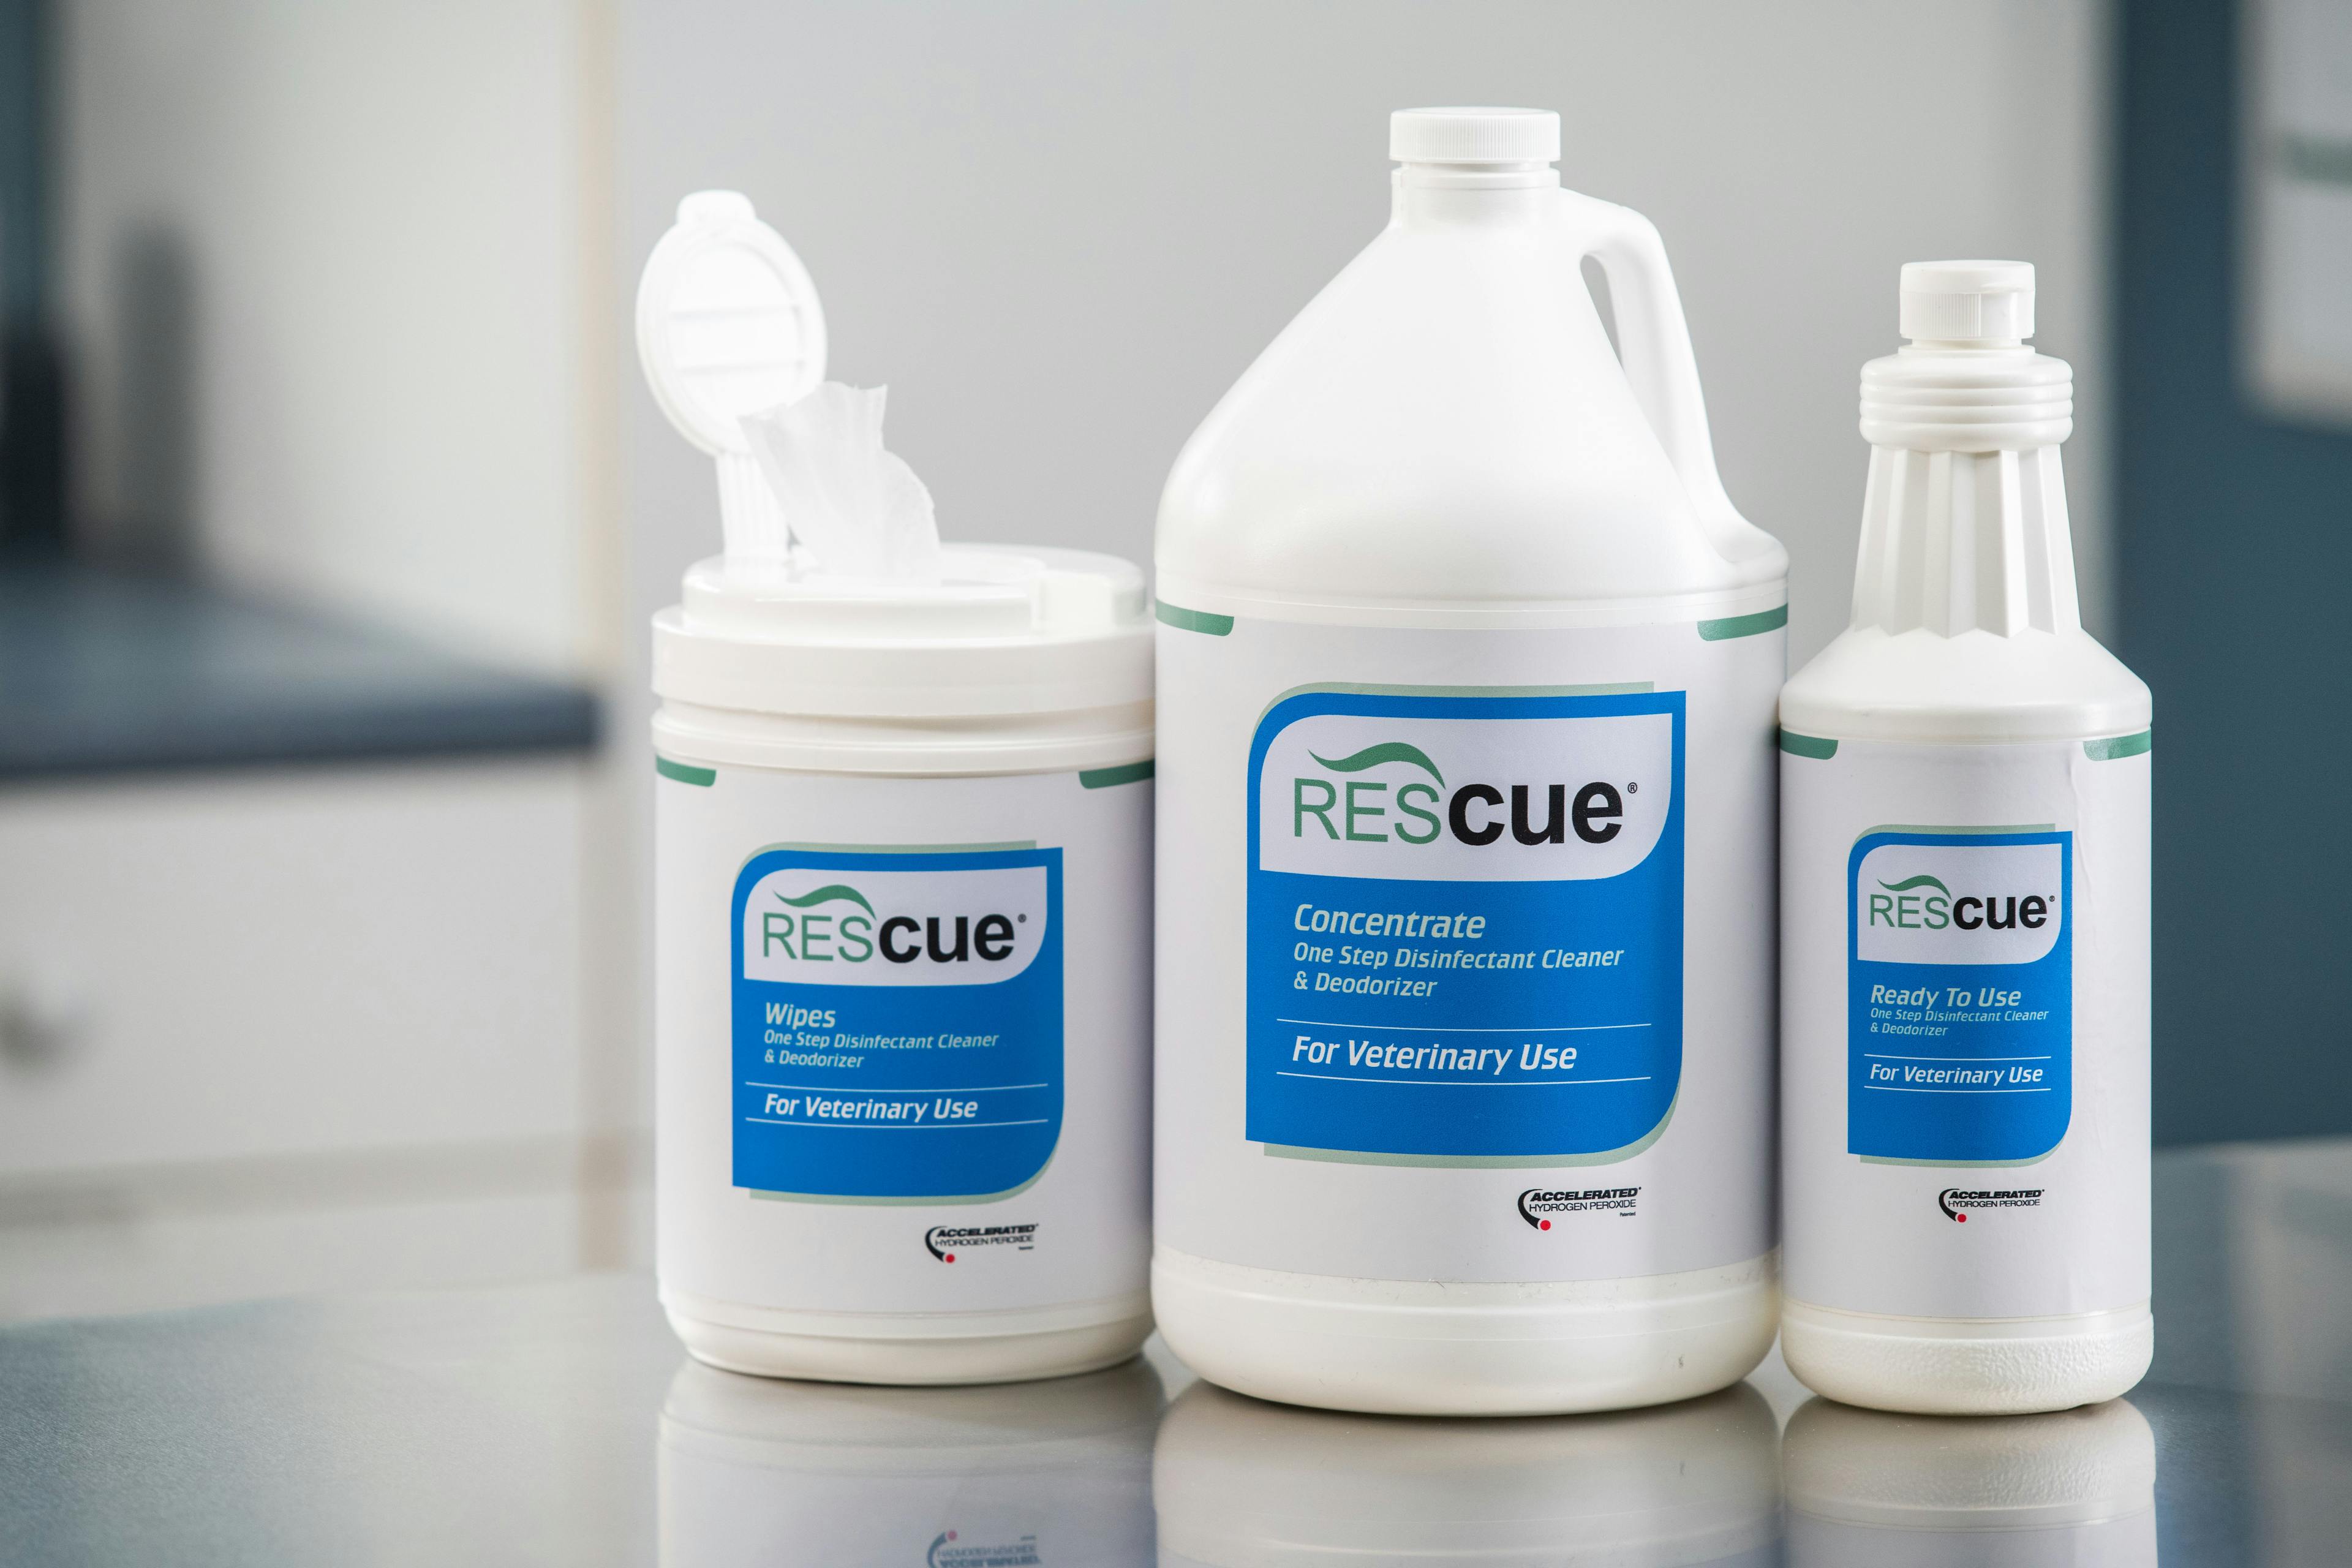 Shelters United and Virox Technologies team up to offer discounts on safe disinfectants